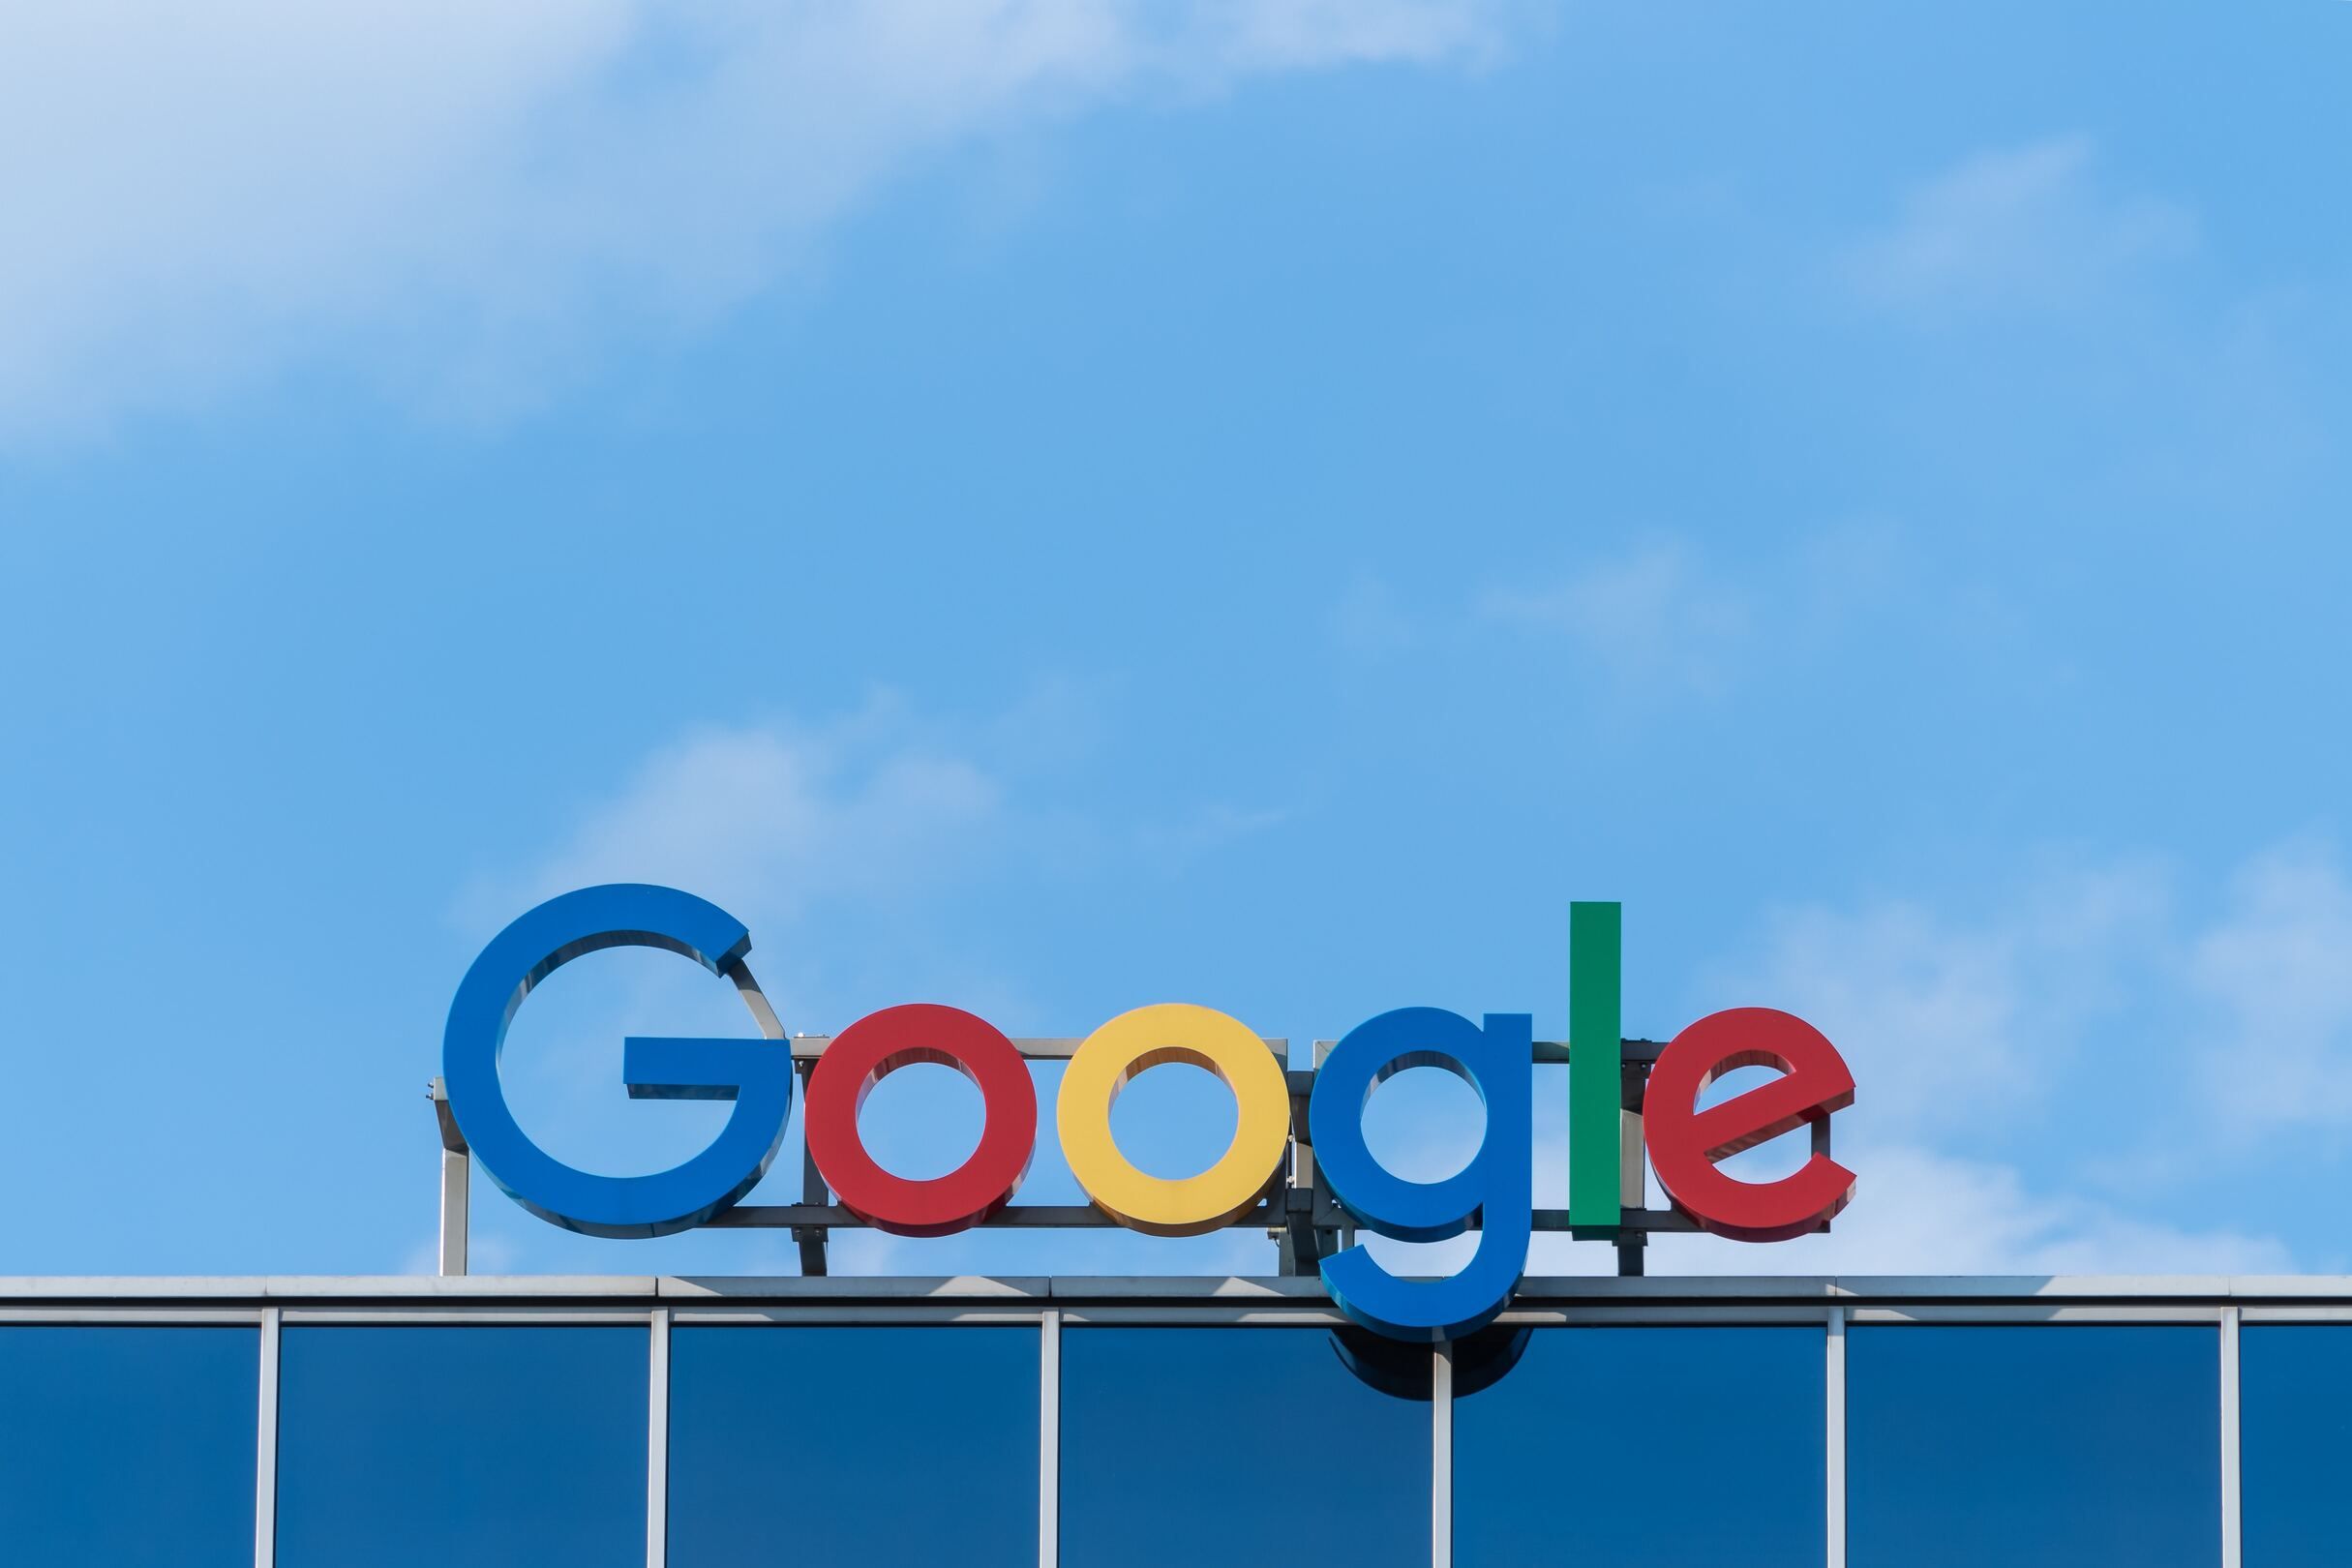 google-sign-logo-photo-with-blue-sky-in-background.jpg